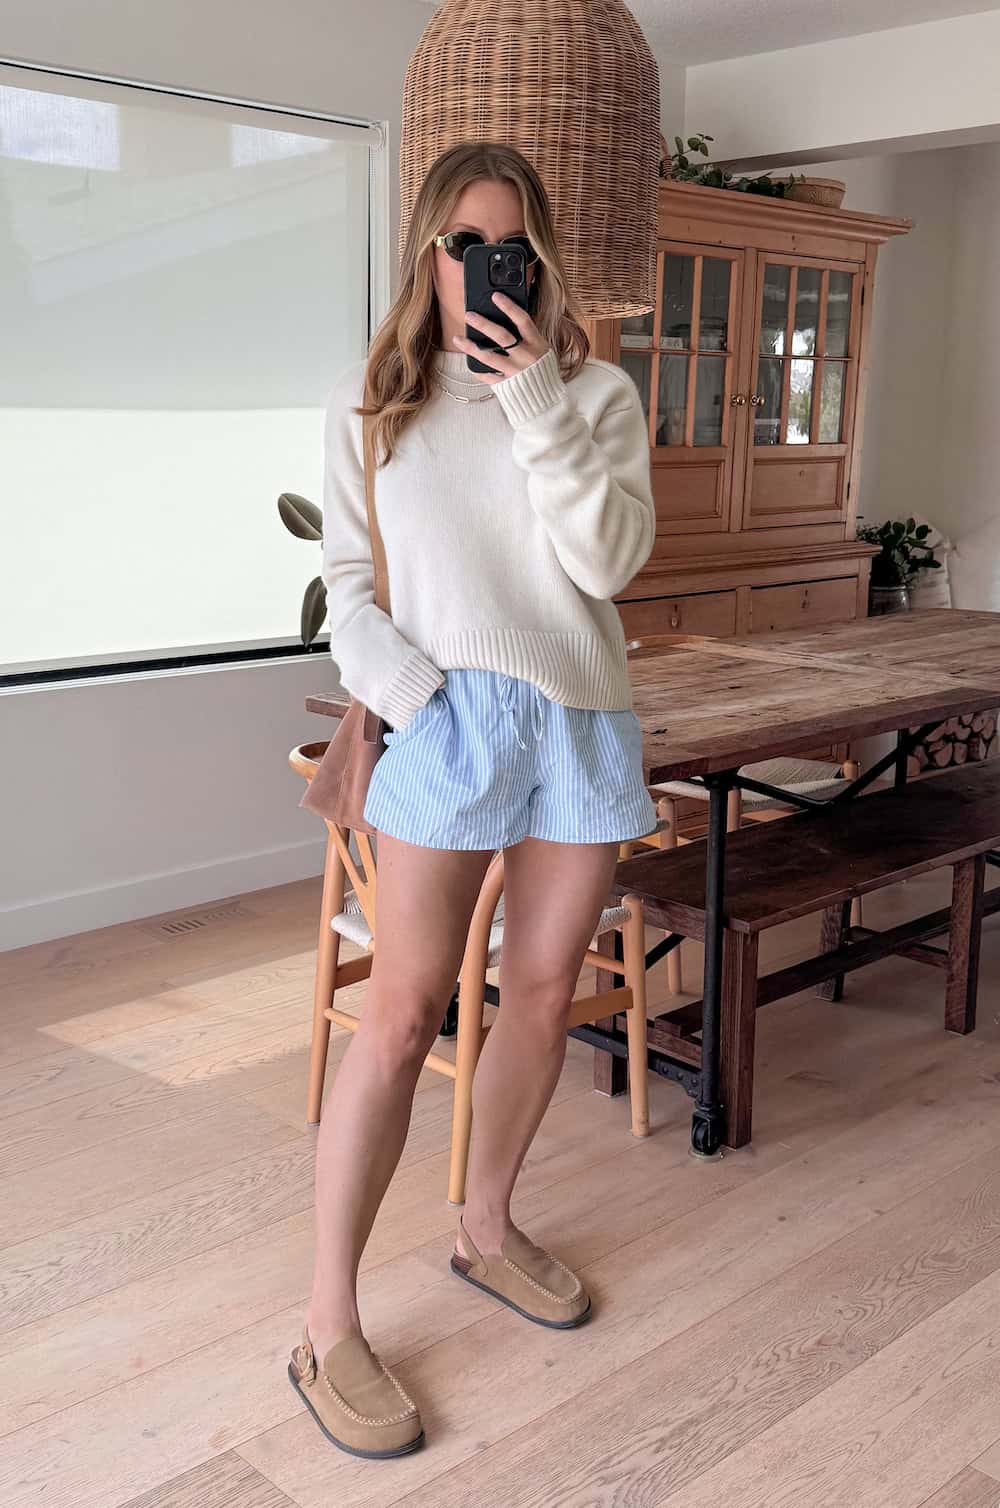 Christal wearing white and blue striped boxer shorts with a cream sweater and cozy shoes.